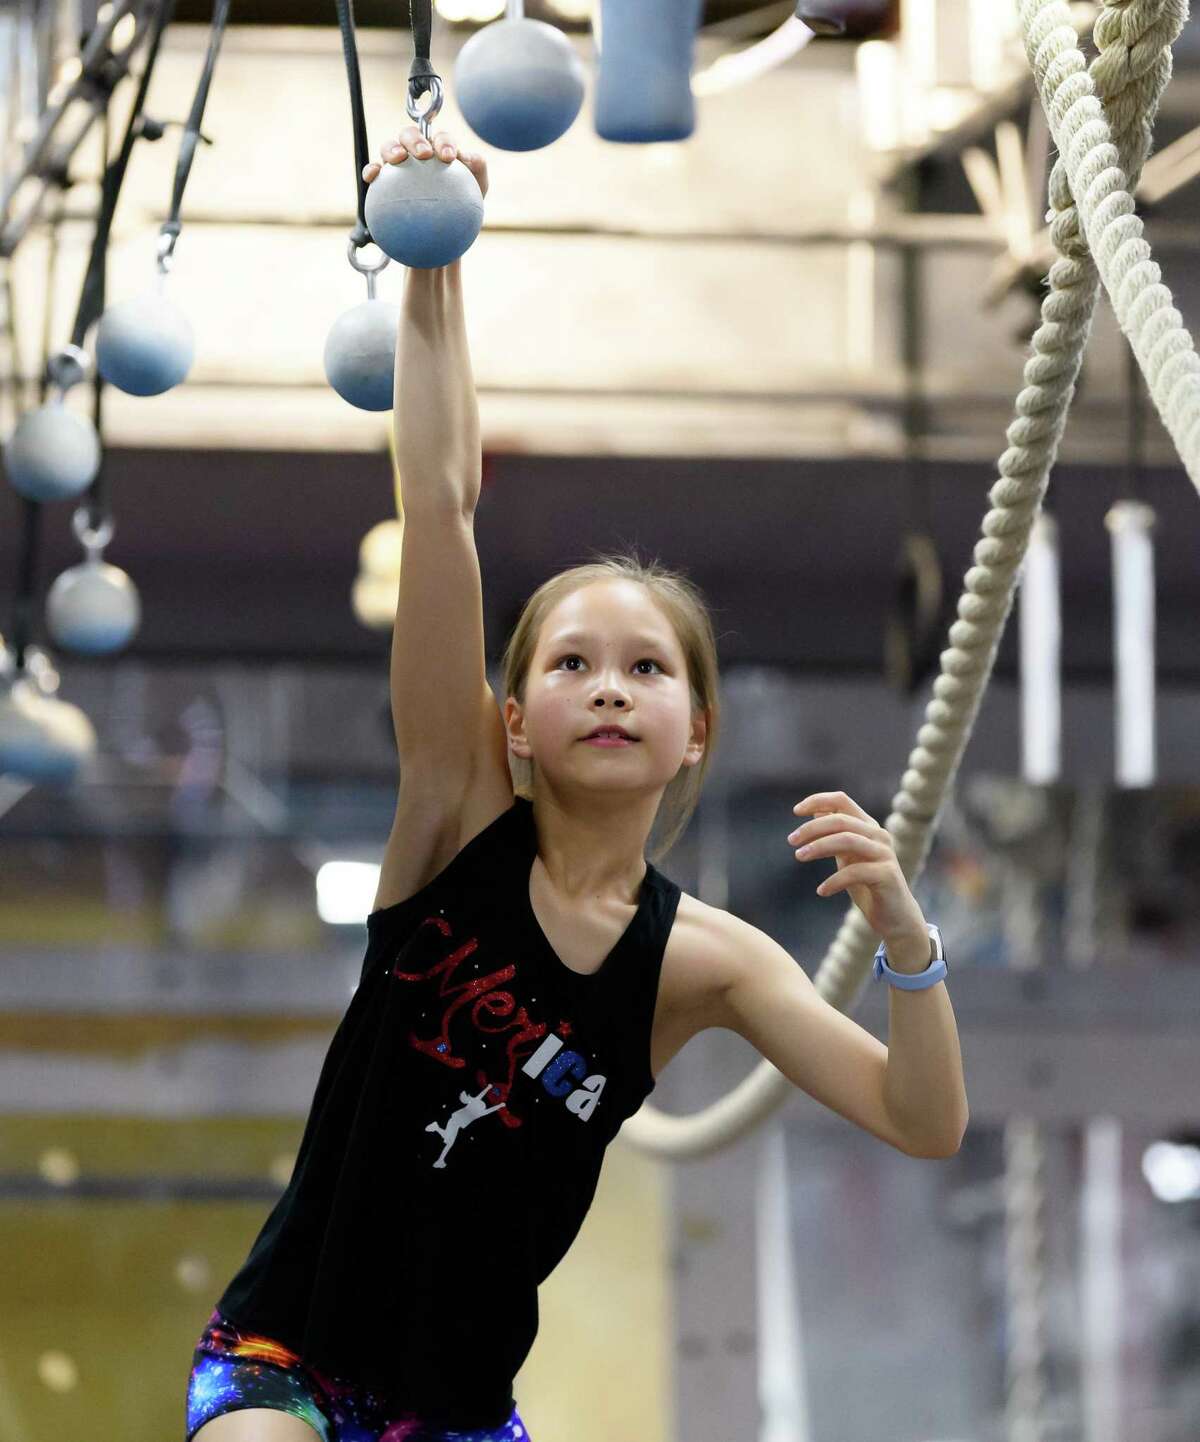 10 year old Meredith Kim works on the Cannon Balls during practice on Friday, March 6, 2020 at Iron Sports in Houston Texas.